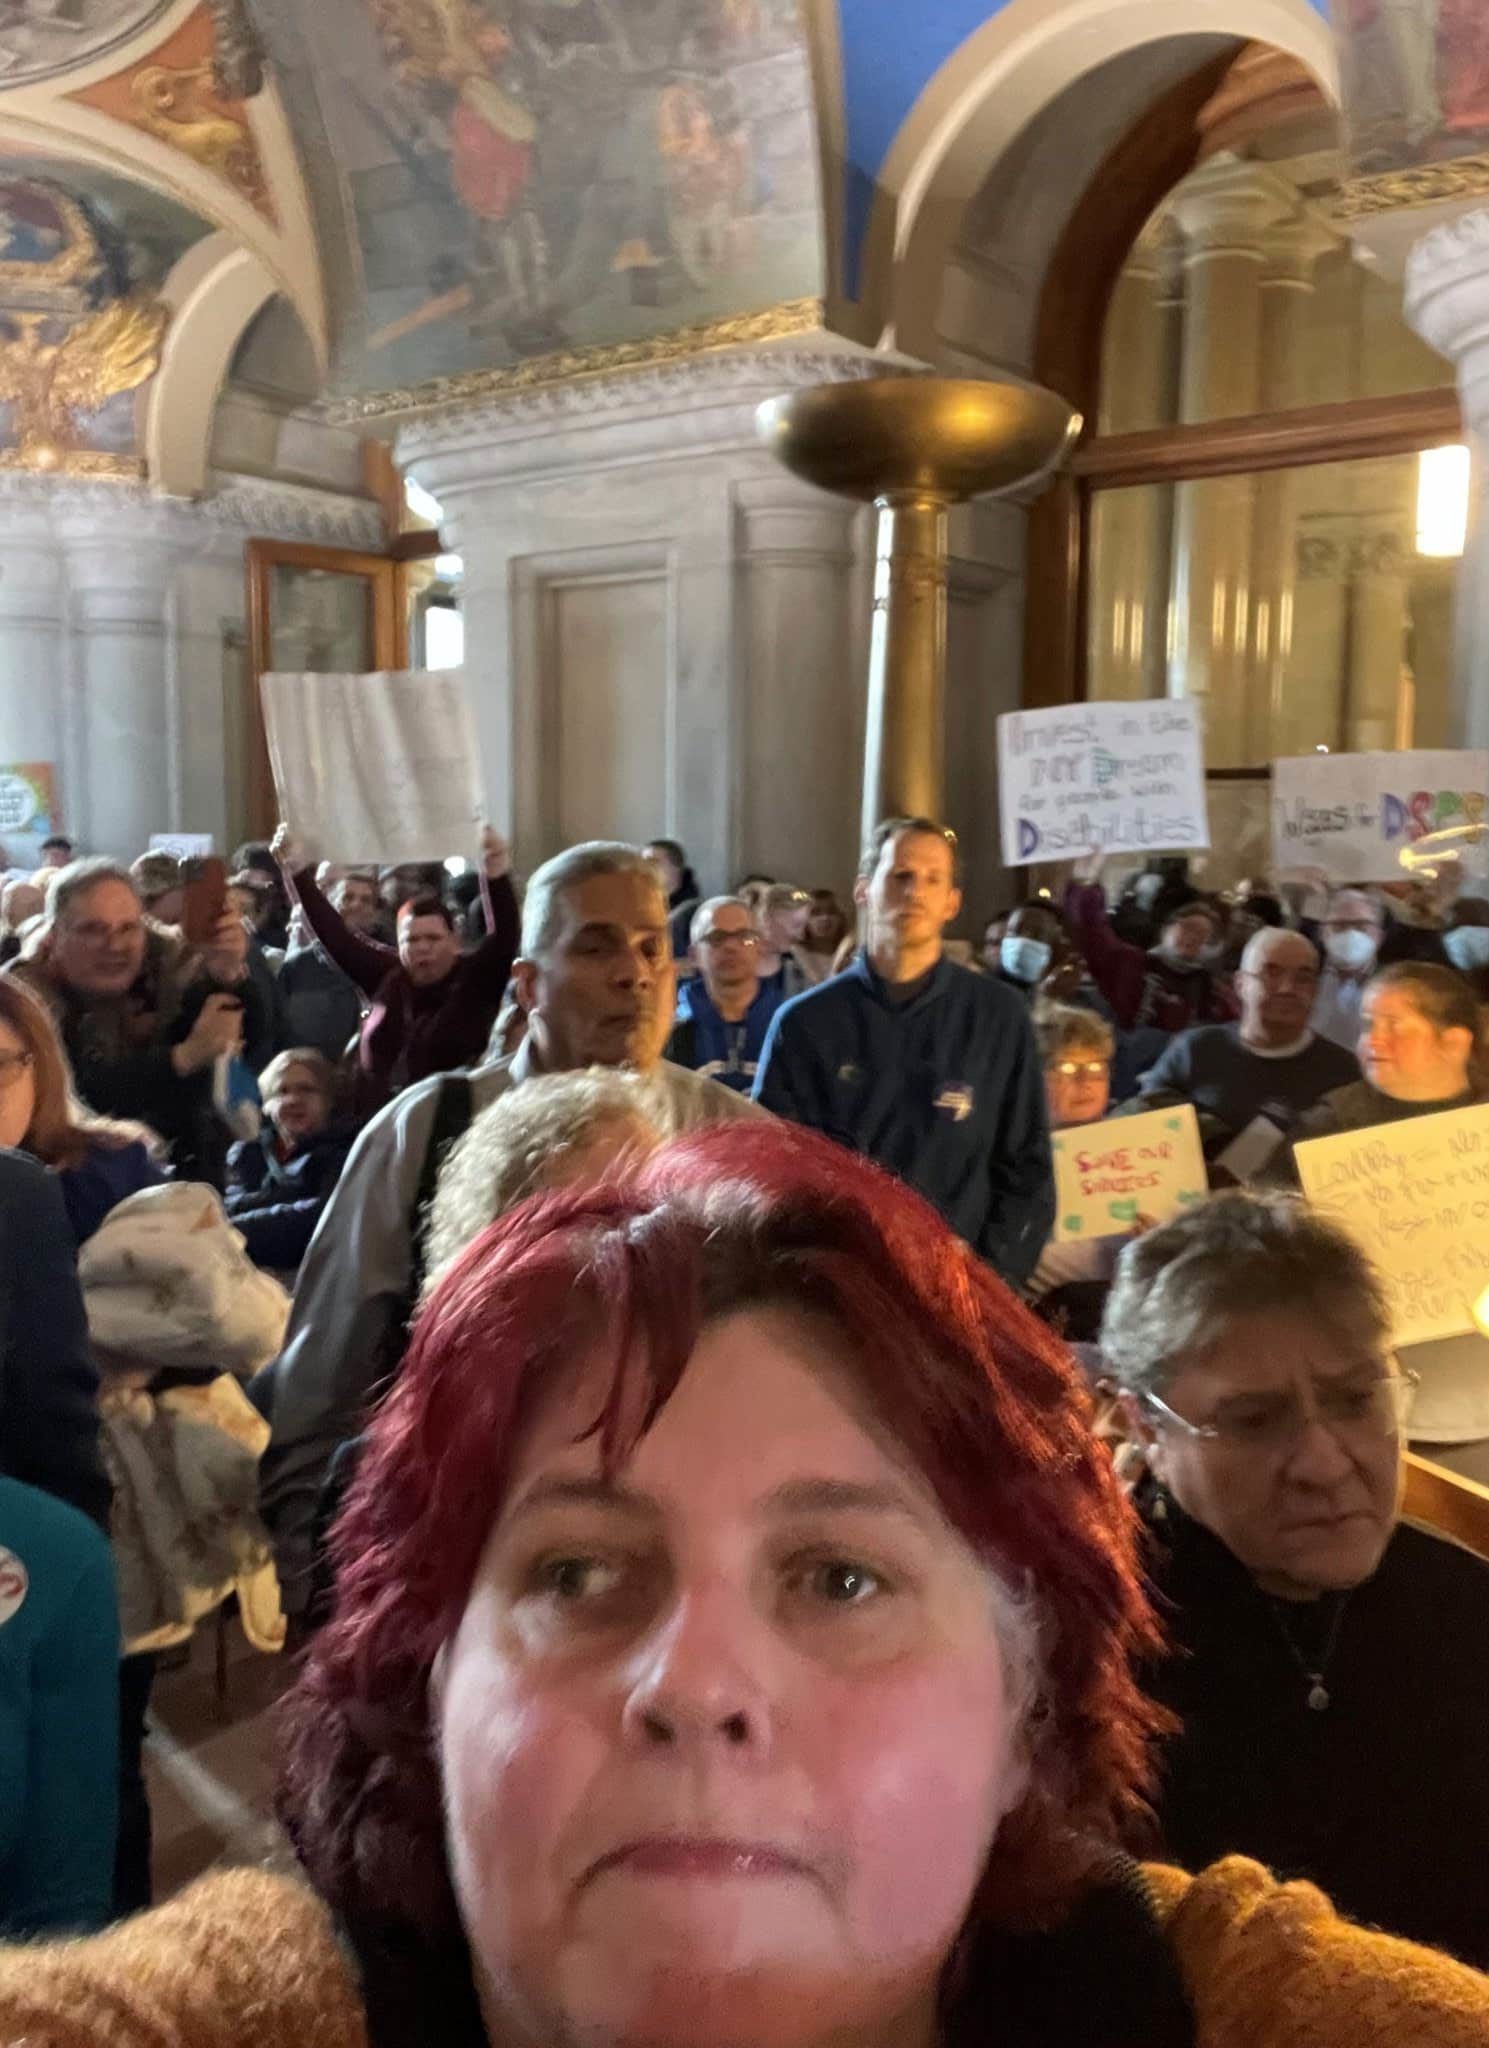 Selfie Taken by Coleen Mackin at the New York State Capitol Rally